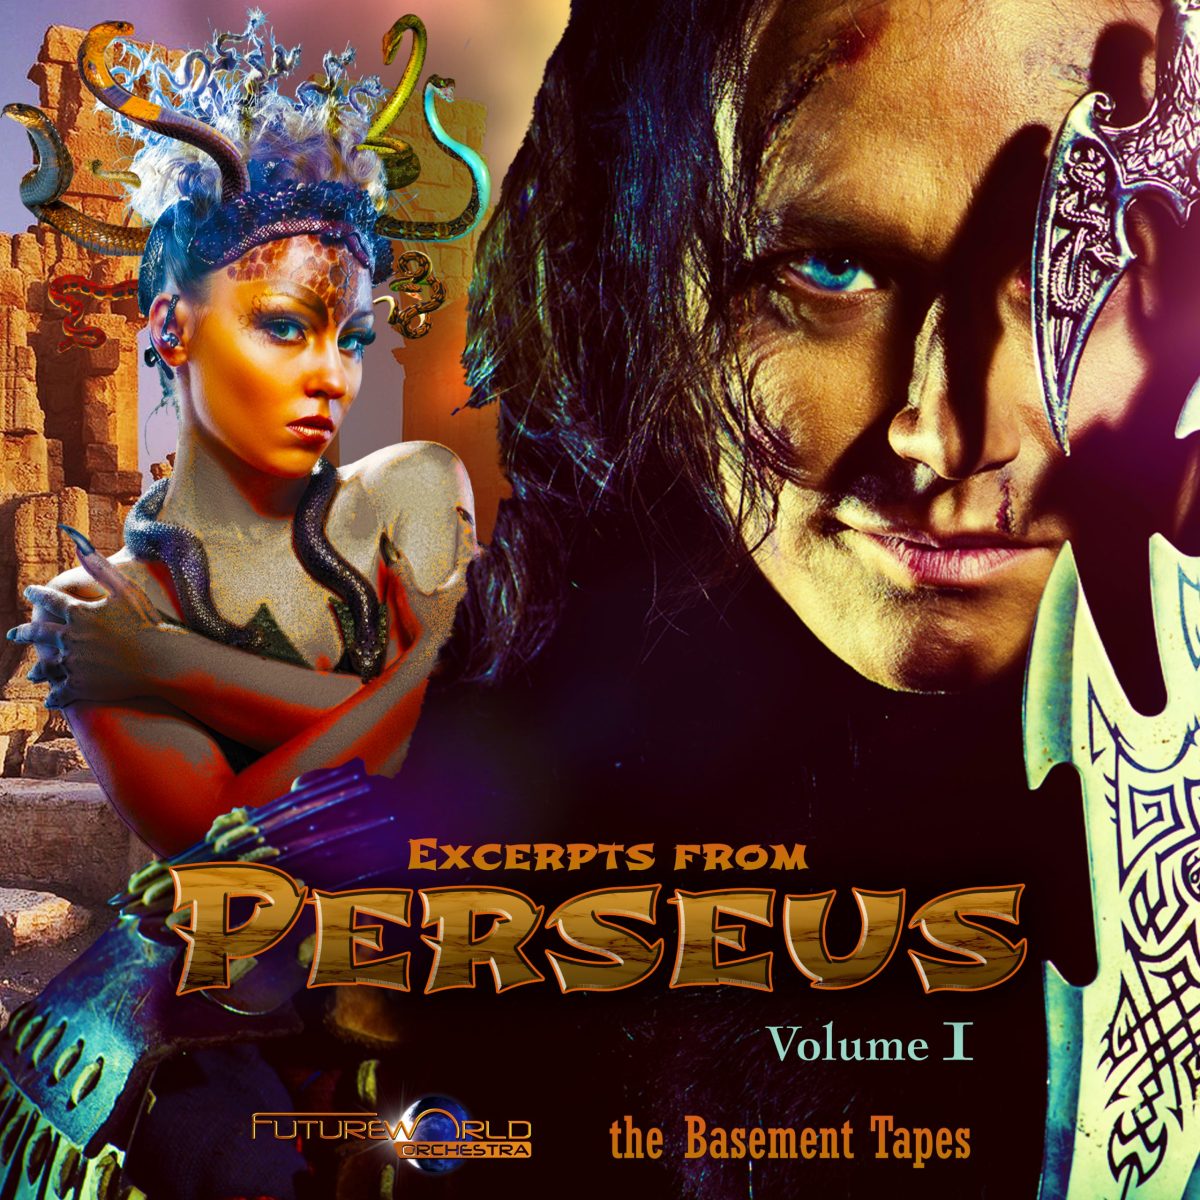 The Perseus Music Project - Volume 1